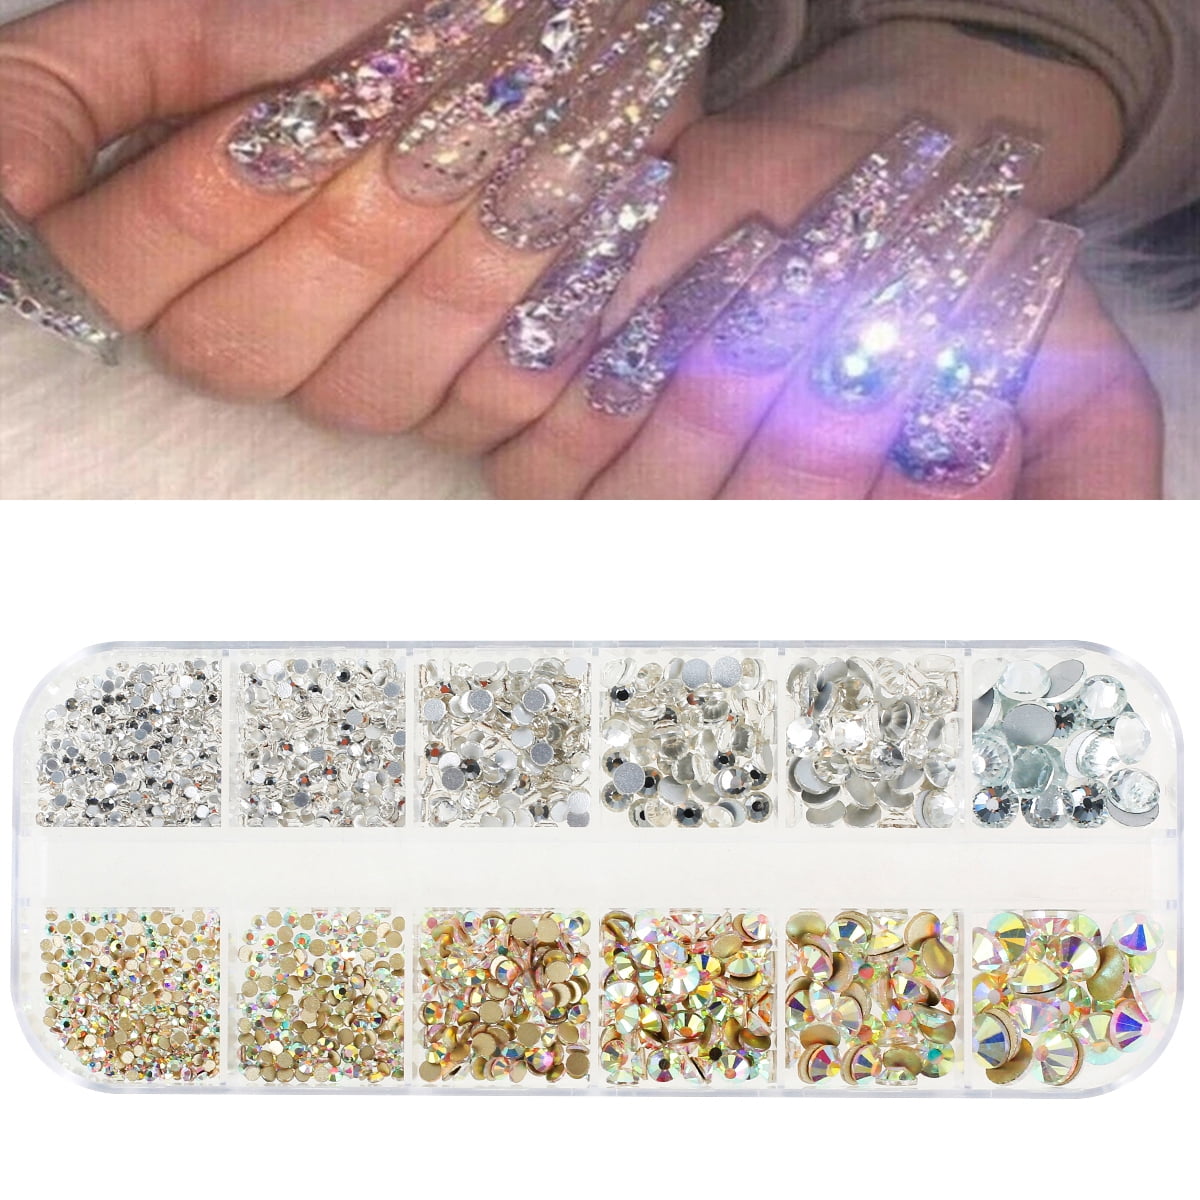 FULZTEY 19200Pcs Flatback Jelly Rhinestones Kit Nail Art Crystals Gem  Stones Diamond for Crafts Mixed Color AB Crystal Rhinestones for Tumbler  Nail Jewelry Decoration Design Charms DIY Crafts Clothes S9